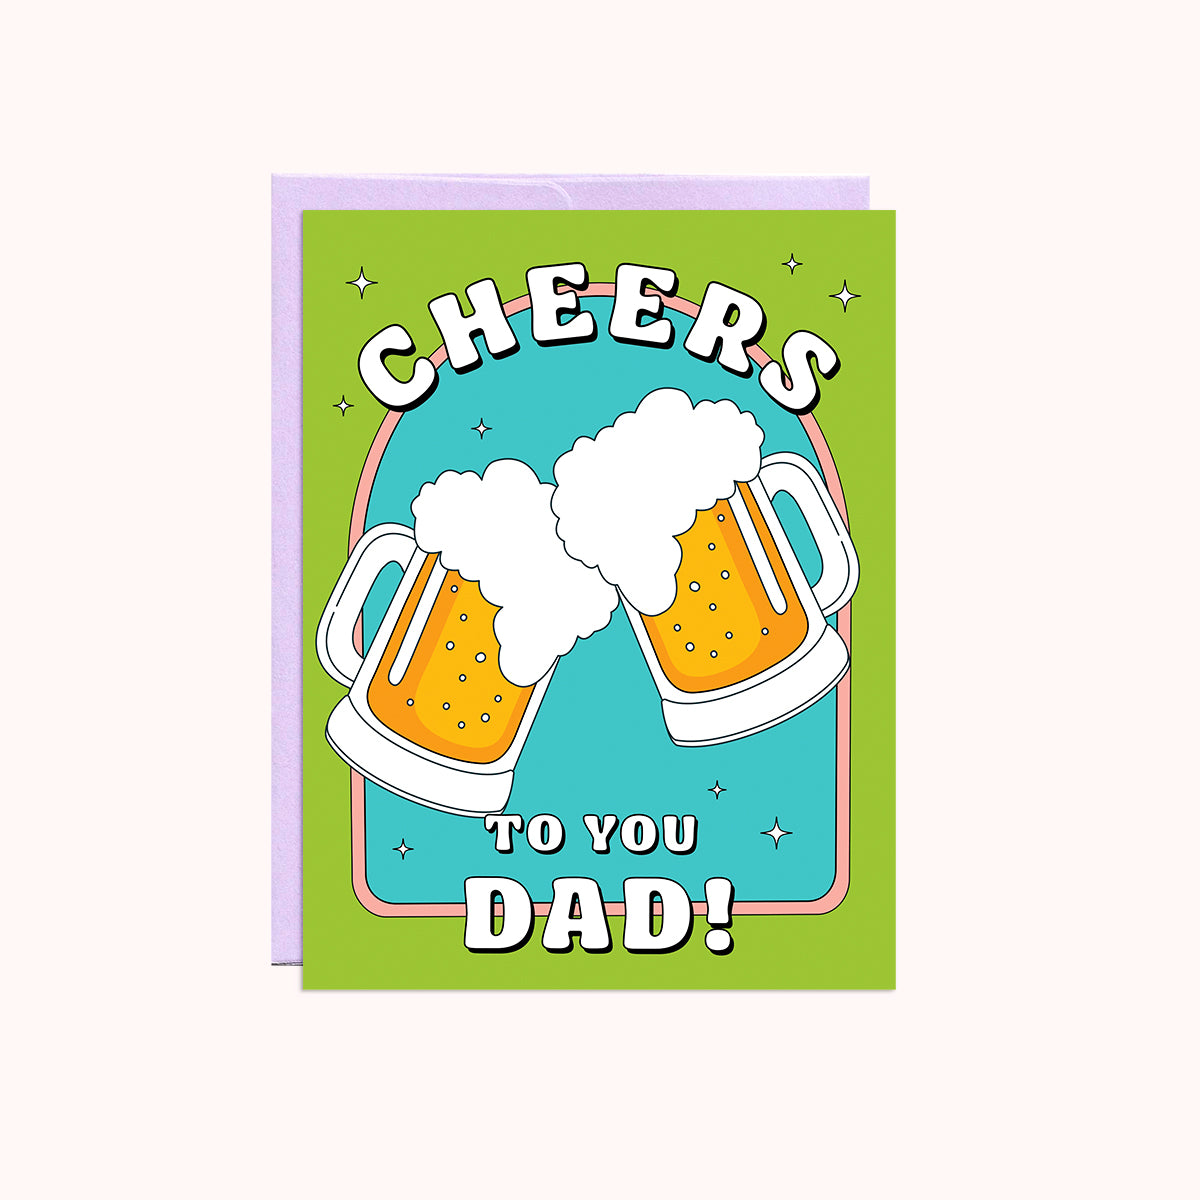 Cheers To You Dad Card